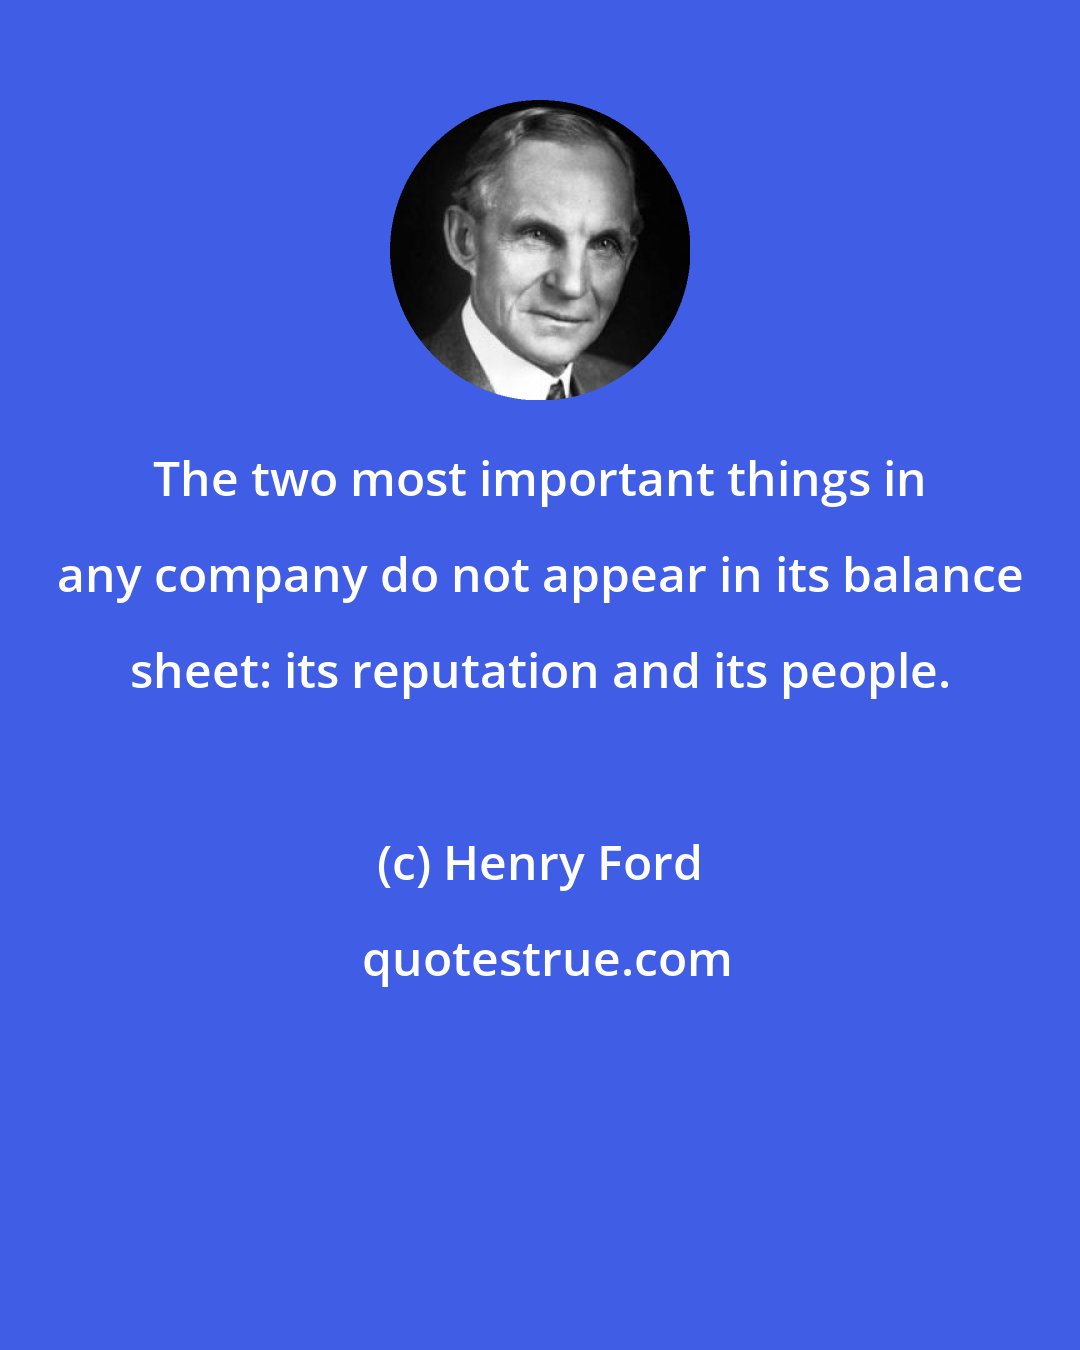 Henry Ford: The two most important things in any company do not appear in its balance sheet: its reputation and its people.